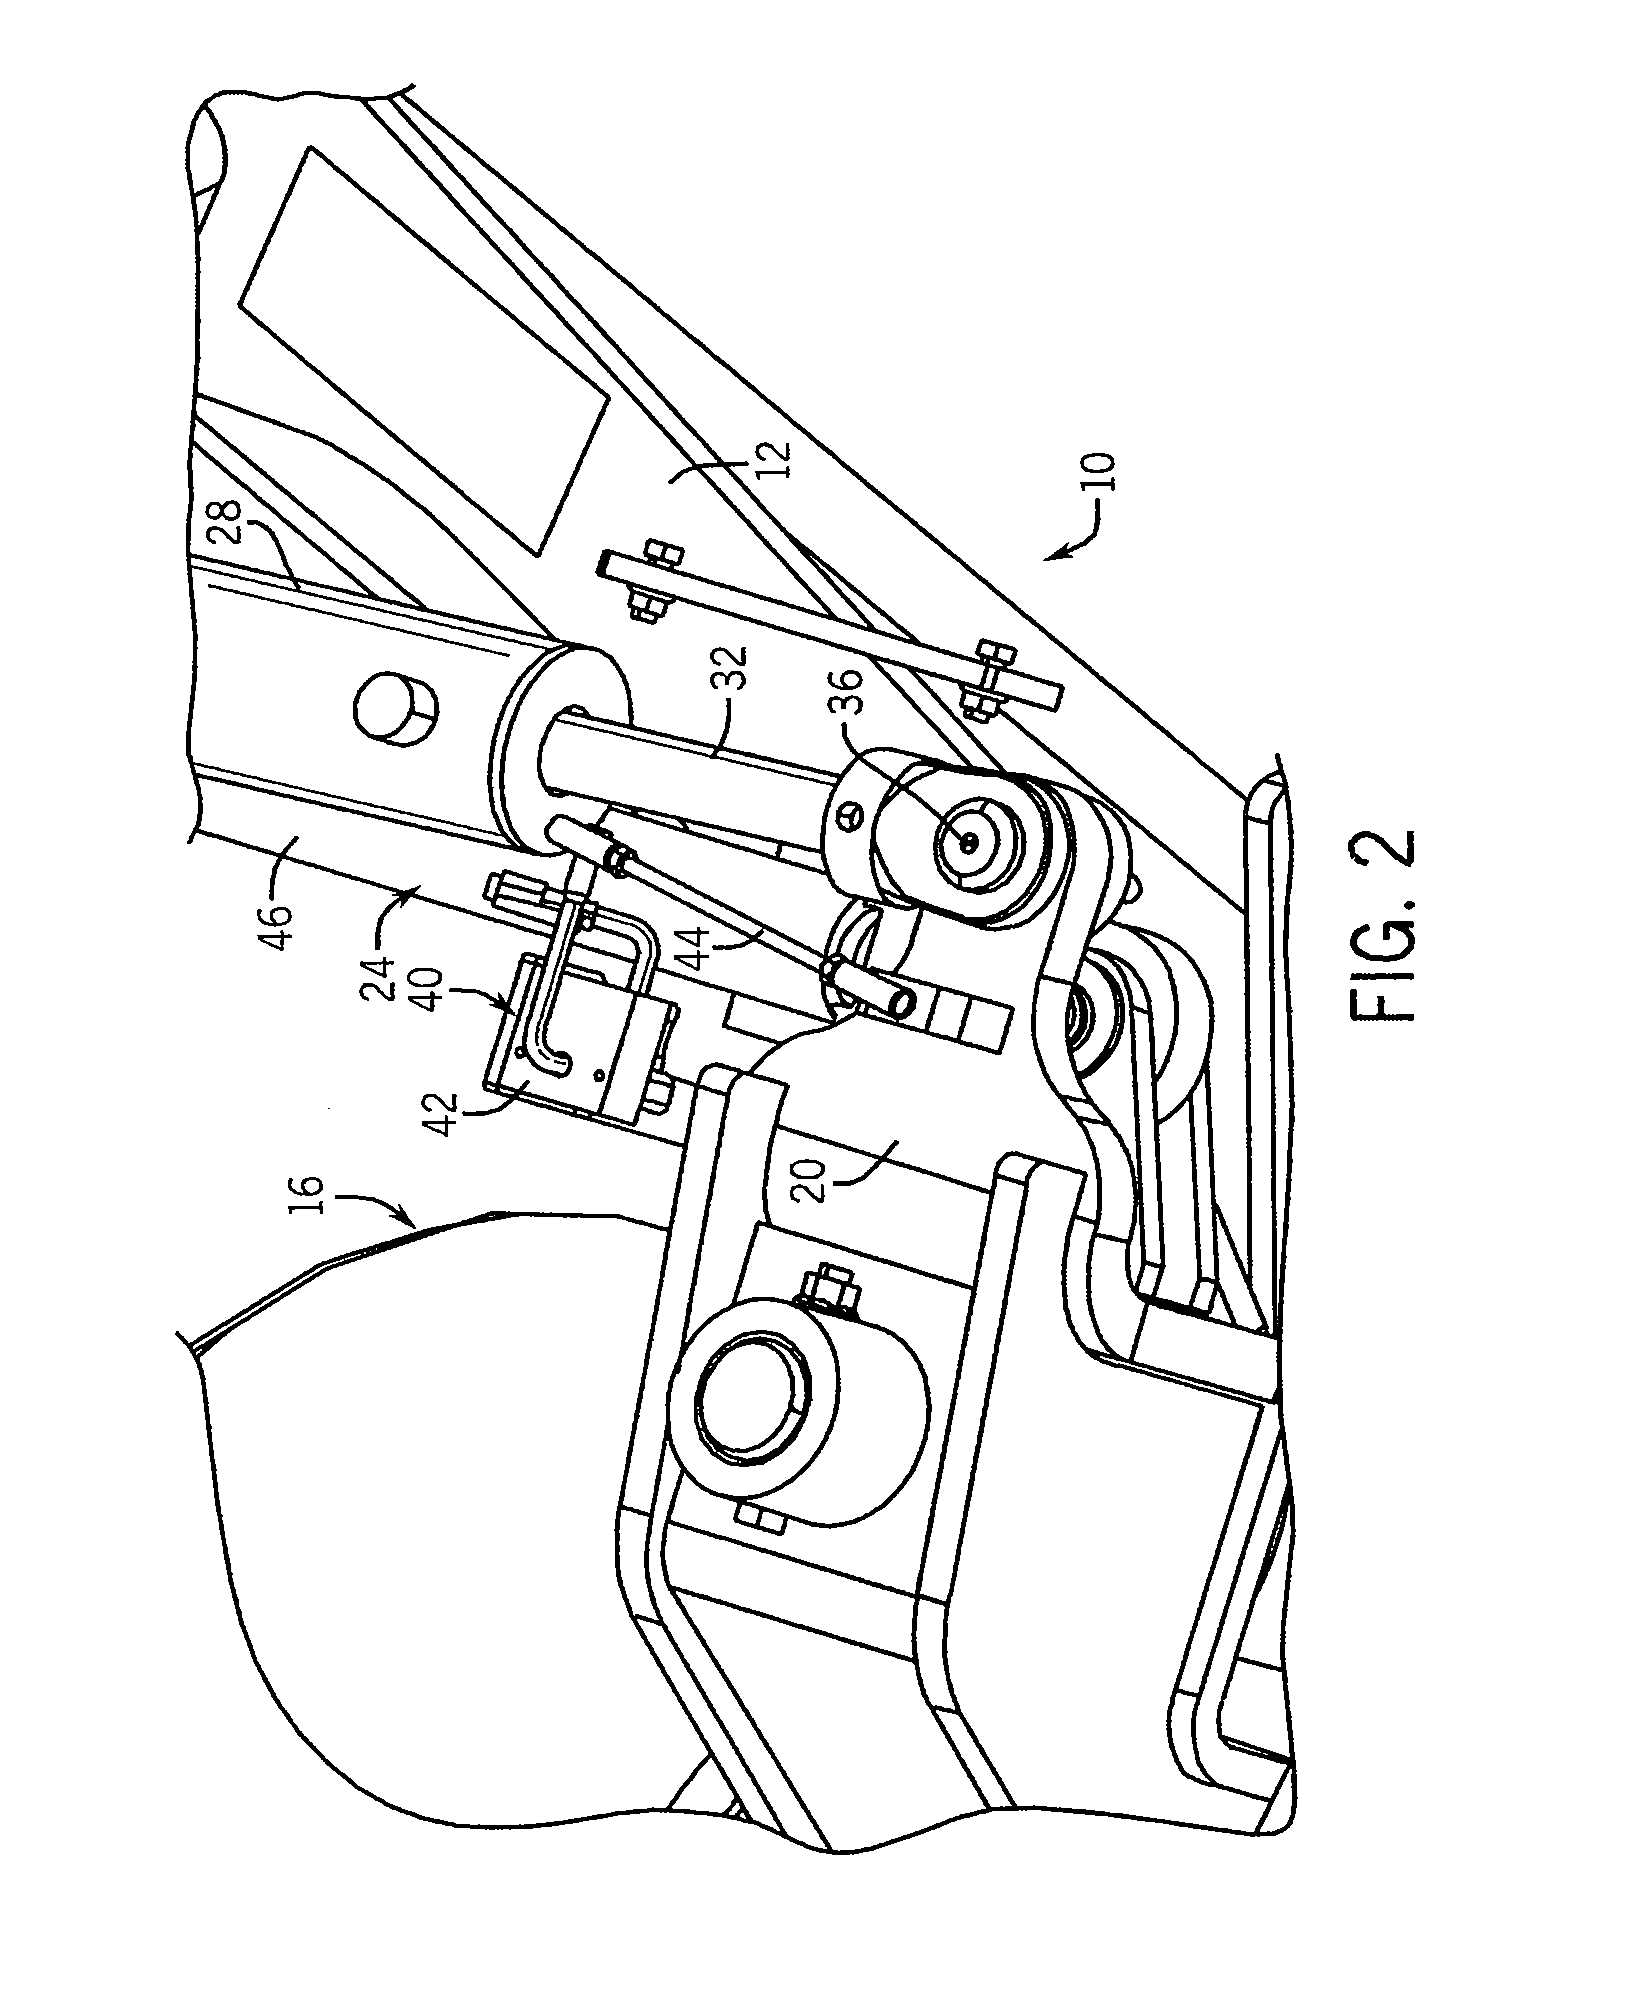 Method For Speed Based Control Of An Implement Steering System